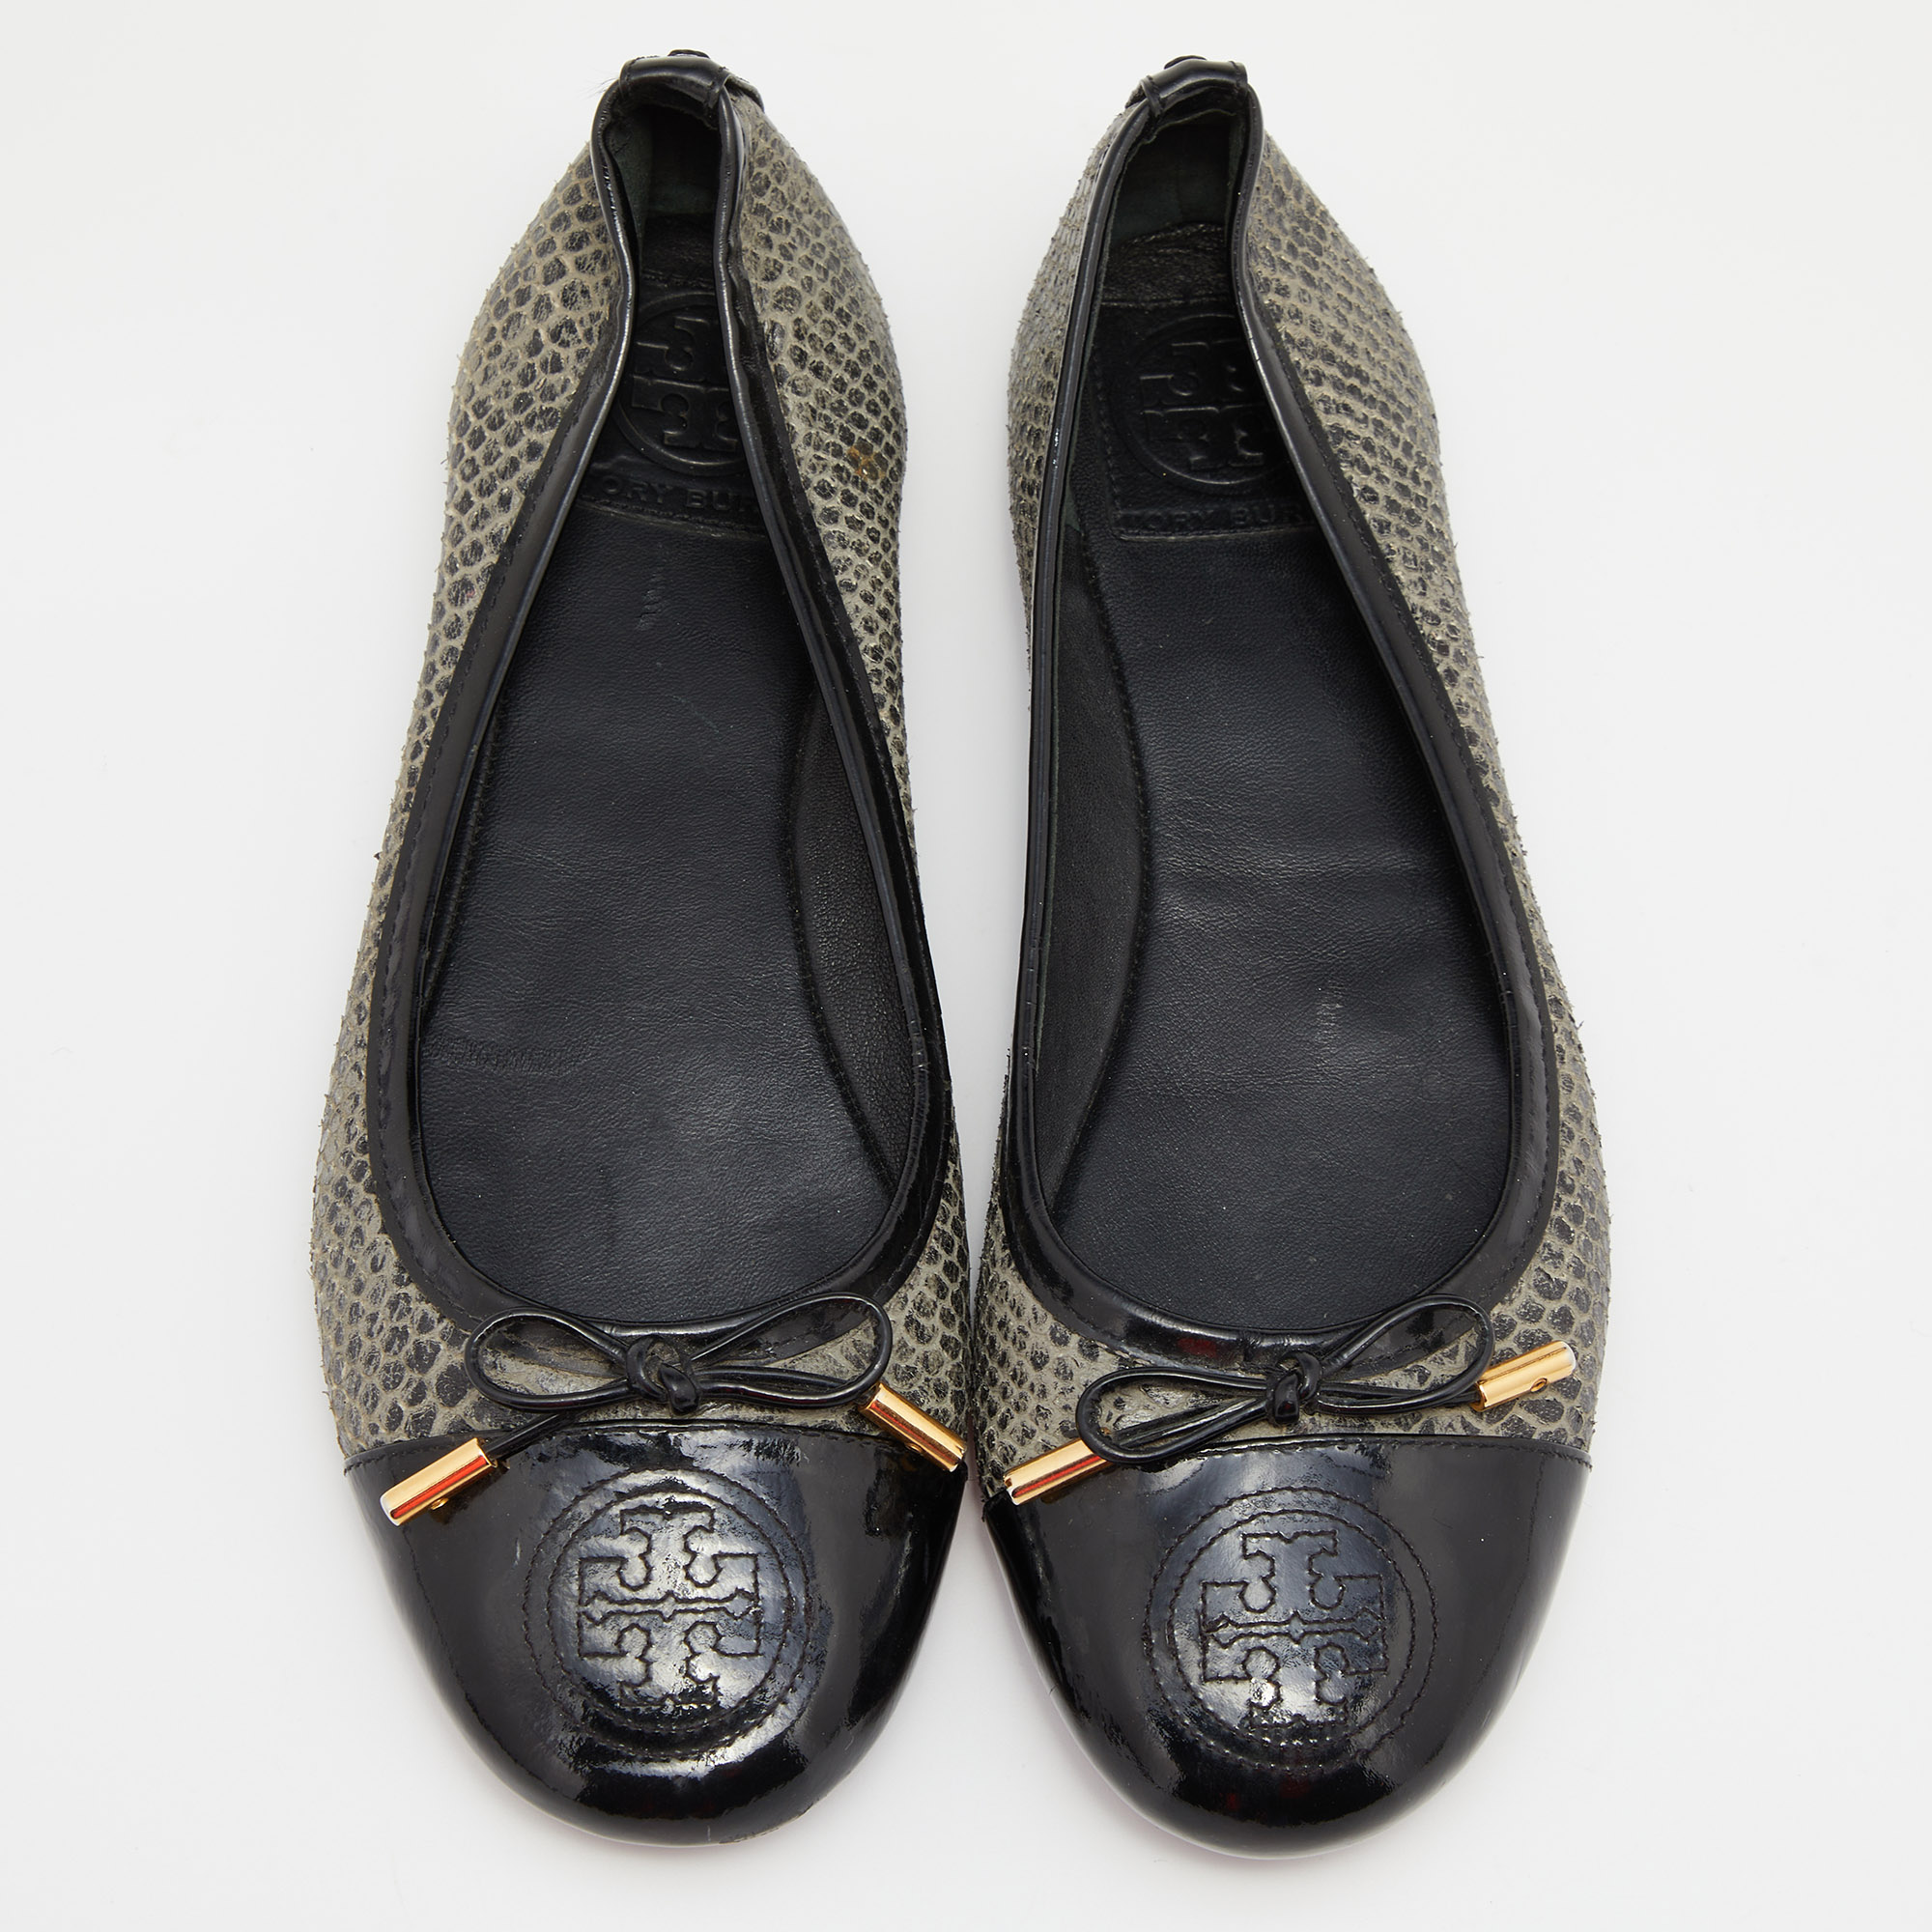 Tory Burch Grey/Black Python Embossed Leather And Patent Leather Ballet Flats Size 38.5